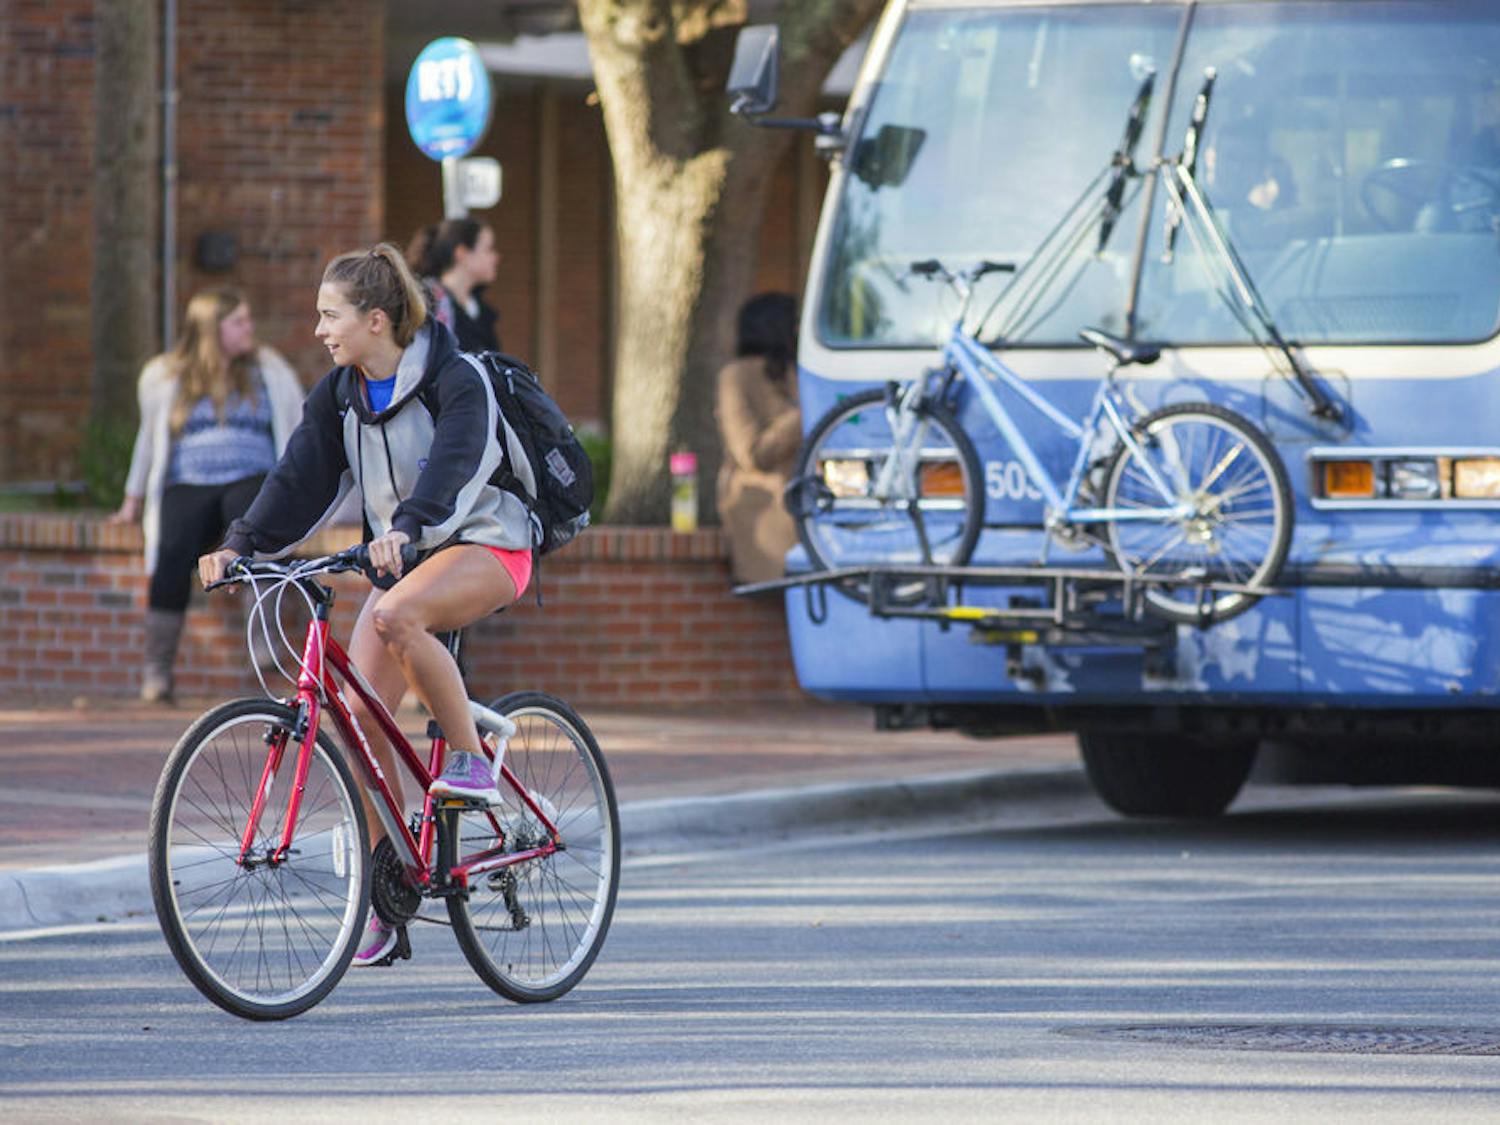 Up to 4 percent of those who take a bus or train to work rode bicycles to get to the transit hub, new UF/IFAS research shows. Those bicyclists pedaled an average of 2 miles to the stations, according to data analyzed by UF/IFAS geomatics Associate Professor Henry Hochmair.